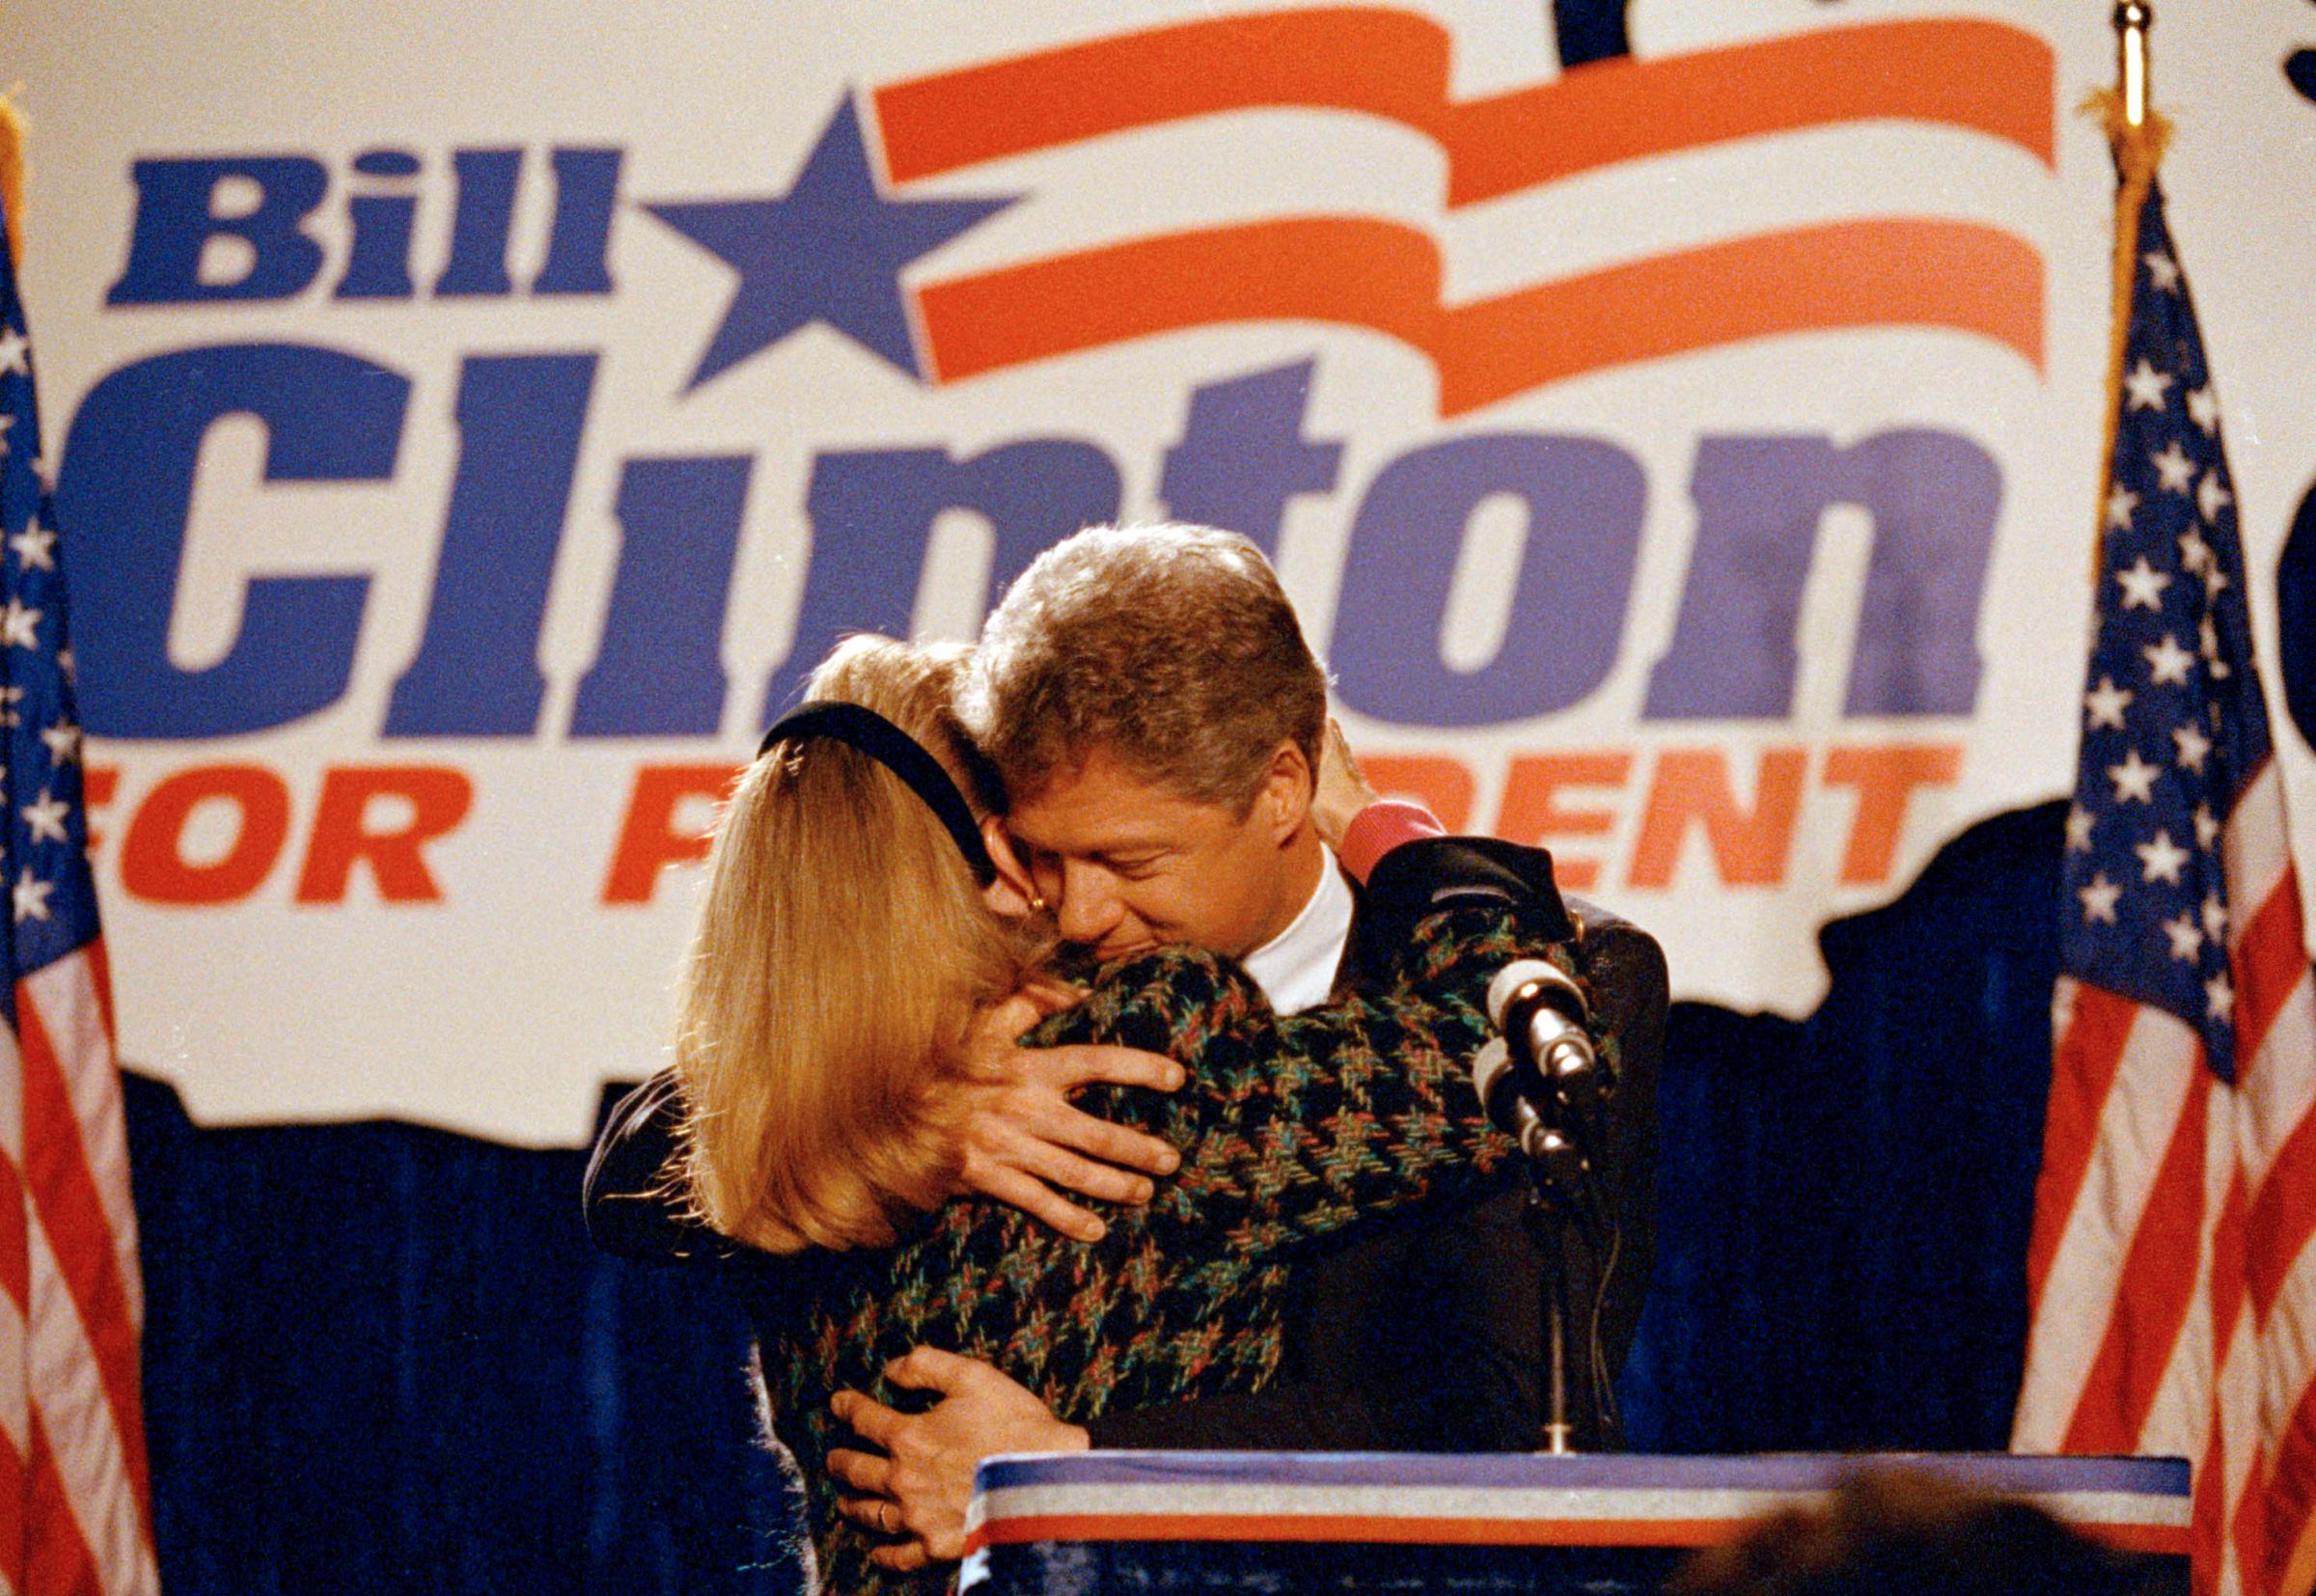 Democratic presidential candidate Bill Clinton hugs his wife Hillary Clinton after she introduced him to well wishers at a downtown Chicago hotel, March 10, 1992.